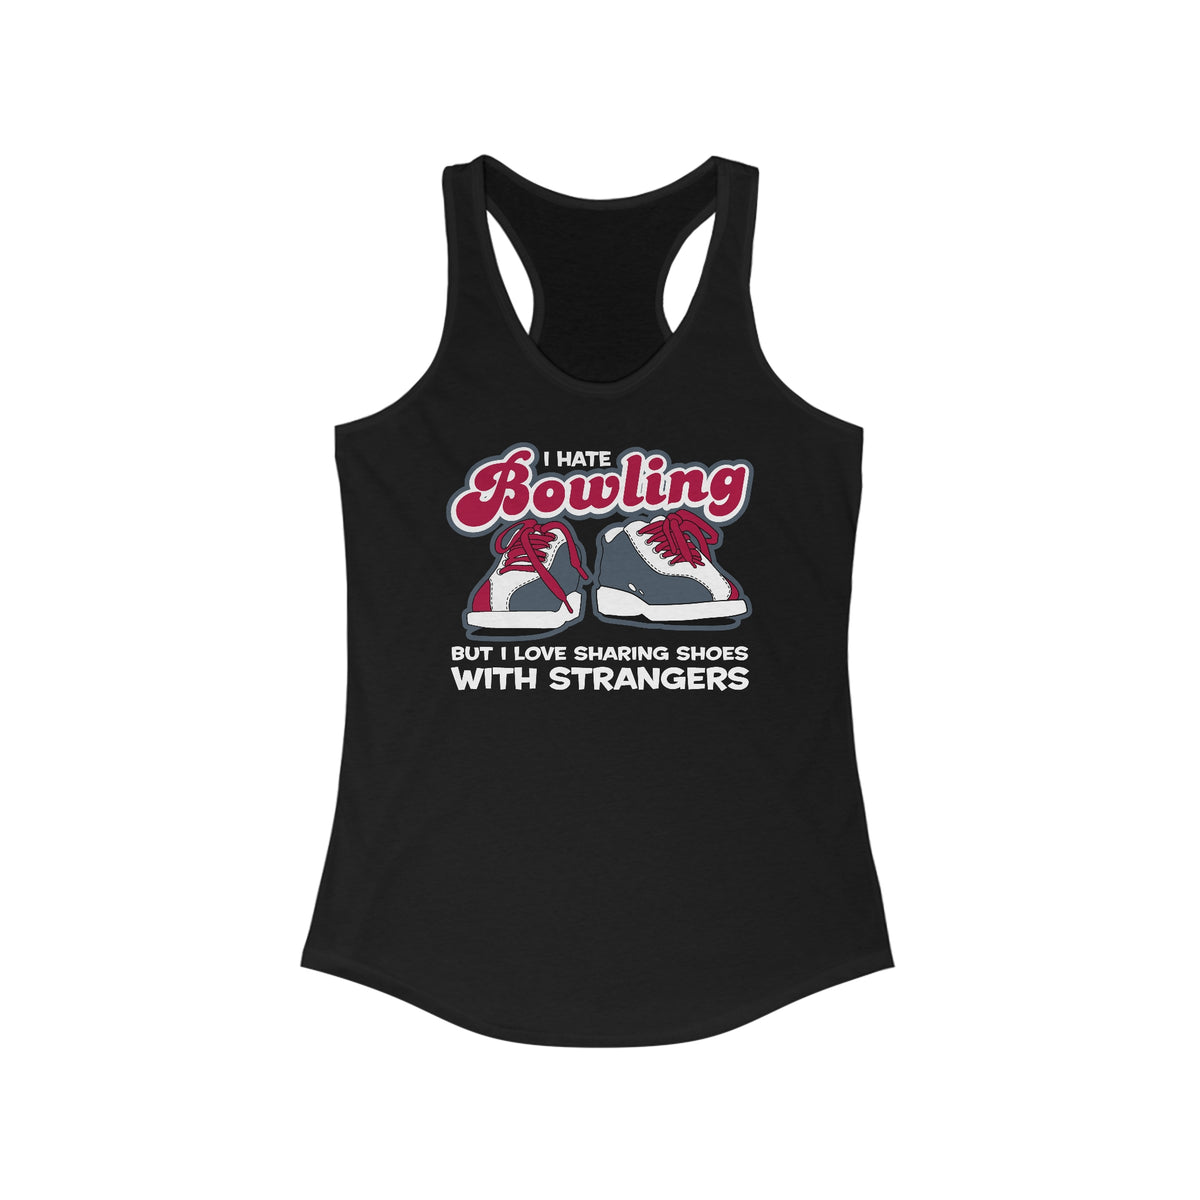 I Hate Bowling But I Love Sharing Shoes With Strangers - Women’s Racerback Tank